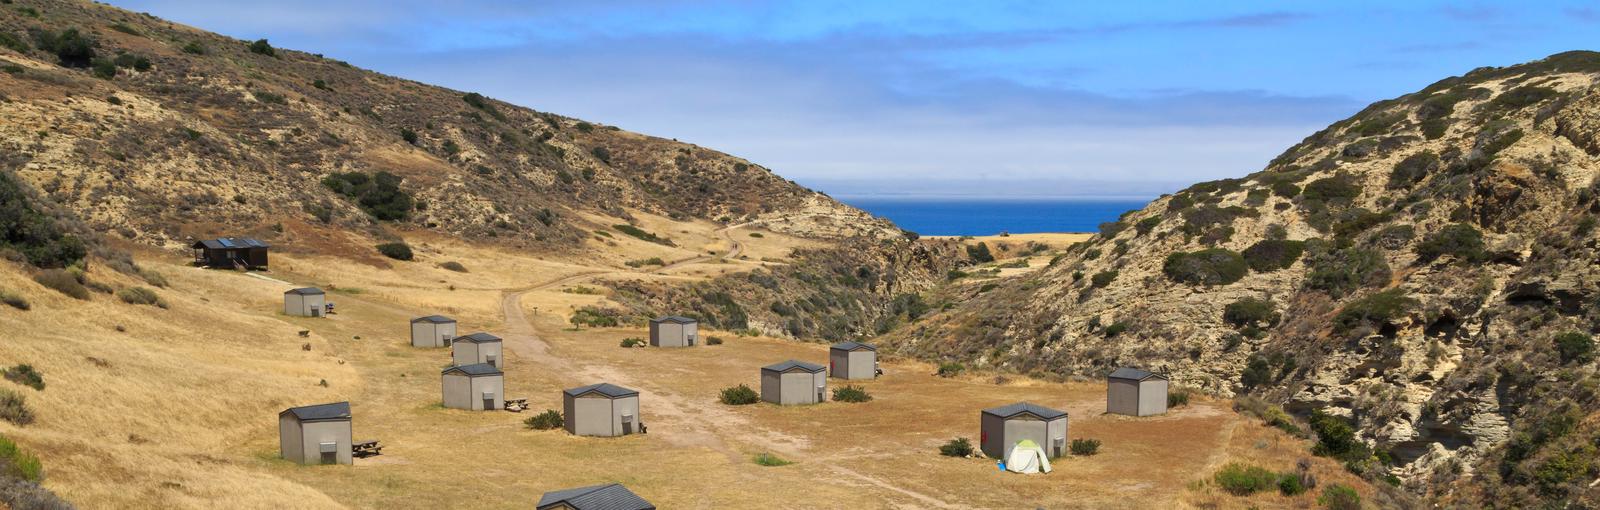 Eight foot tall wind shelters on a dry, grassy terrace overlooking the oceanSanta Rosa campground